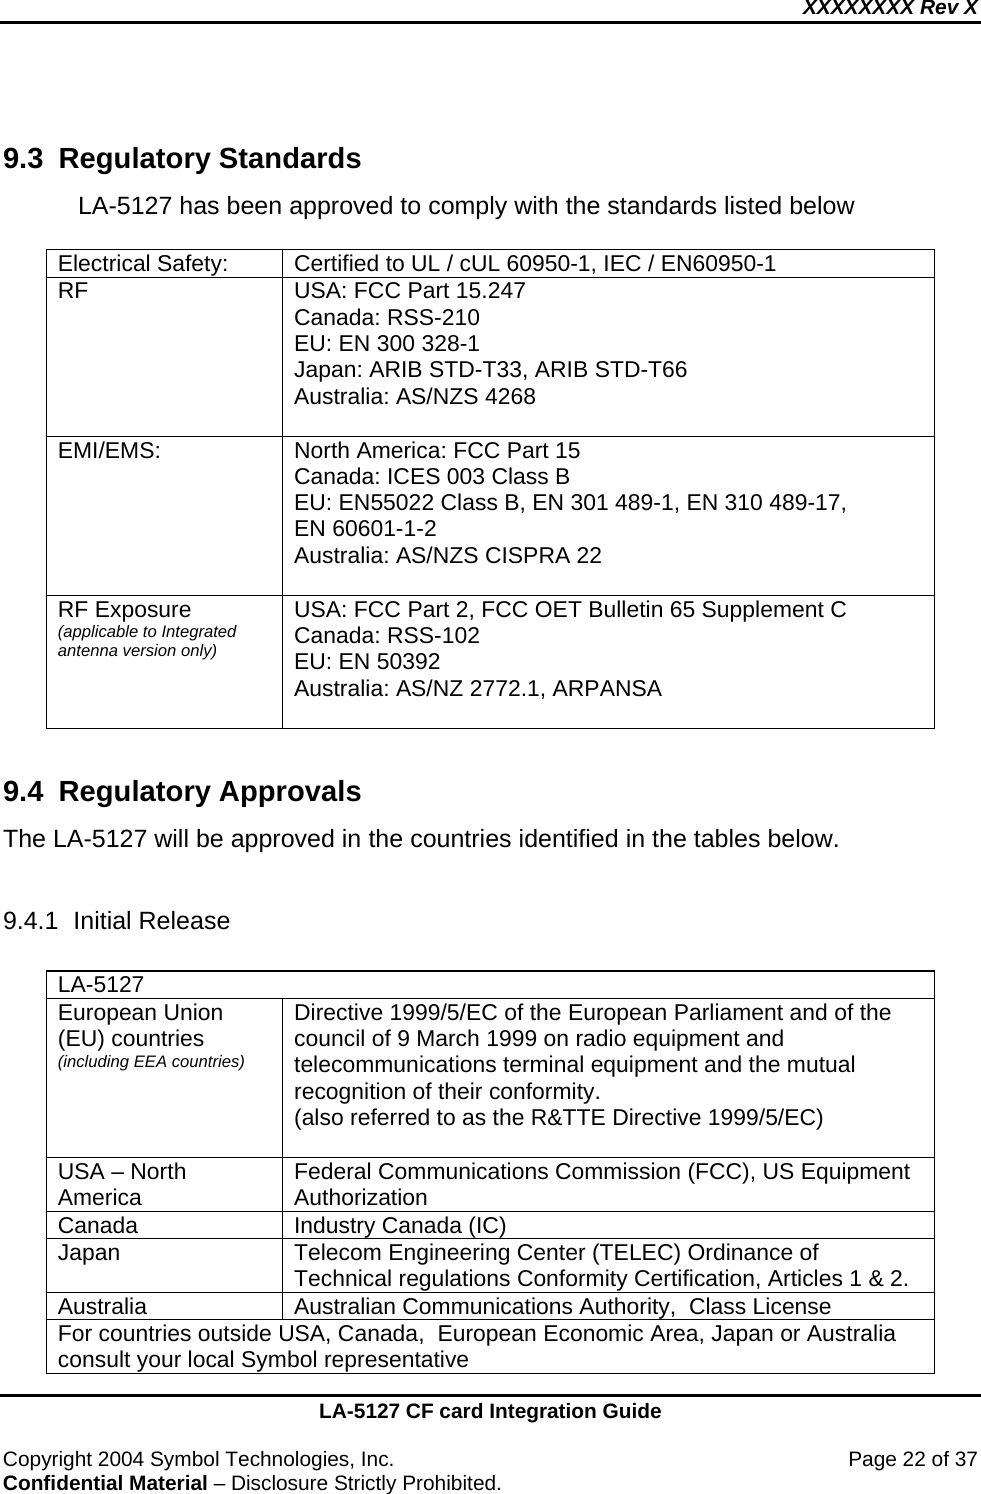 XXXXXXXX Rev X    LA-5127 CF card Integration Guide  Copyright 2004 Symbol Technologies, Inc.    Page 22 of 37 Confidential Material – Disclosure Strictly Prohibited.  9.3 Regulatory Standards LA-5127 has been approved to comply with the standards listed below   Electrical Safety:  Certified to UL / cUL 60950-1, IEC / EN60950-1 RF  USA: FCC Part 15.247 Canada: RSS-210 EU: EN 300 328-1 Japan: ARIB STD-T33, ARIB STD-T66  Australia: AS/NZS 4268  EMI/EMS:   North America: FCC Part 15 Canada: ICES 003 Class B  EU: EN55022 Class B, EN 301 489-1, EN 310 489-17,  EN 60601-1-2 Australia: AS/NZS CISPRA 22  RF Exposure (applicable to Integrated antenna version only) USA: FCC Part 2, FCC OET Bulletin 65 Supplement C  Canada: RSS-102 EU: EN 50392 Australia: AS/NZ 2772.1, ARPANSA   9.4 Regulatory Approvals The LA-5127 will be approved in the countries identified in the tables below.    9.4.1 Initial Release  LA-5127 European Union (EU) countries (including EEA countries) Directive 1999/5/EC of the European Parliament and of the council of 9 March 1999 on radio equipment and telecommunications terminal equipment and the mutual recognition of their conformity. (also referred to as the R&amp;TTE Directive 1999/5/EC)  USA – North America  Federal Communications Commission (FCC), US Equipment Authorization Canada  Industry Canada (IC) Japan  Telecom Engineering Center (TELEC) Ordinance of Technical regulations Conformity Certification, Articles 1 &amp; 2. Australia  Australian Communications Authority,  Class License For countries outside USA, Canada,  European Economic Area, Japan or Australia consult your local Symbol representative 